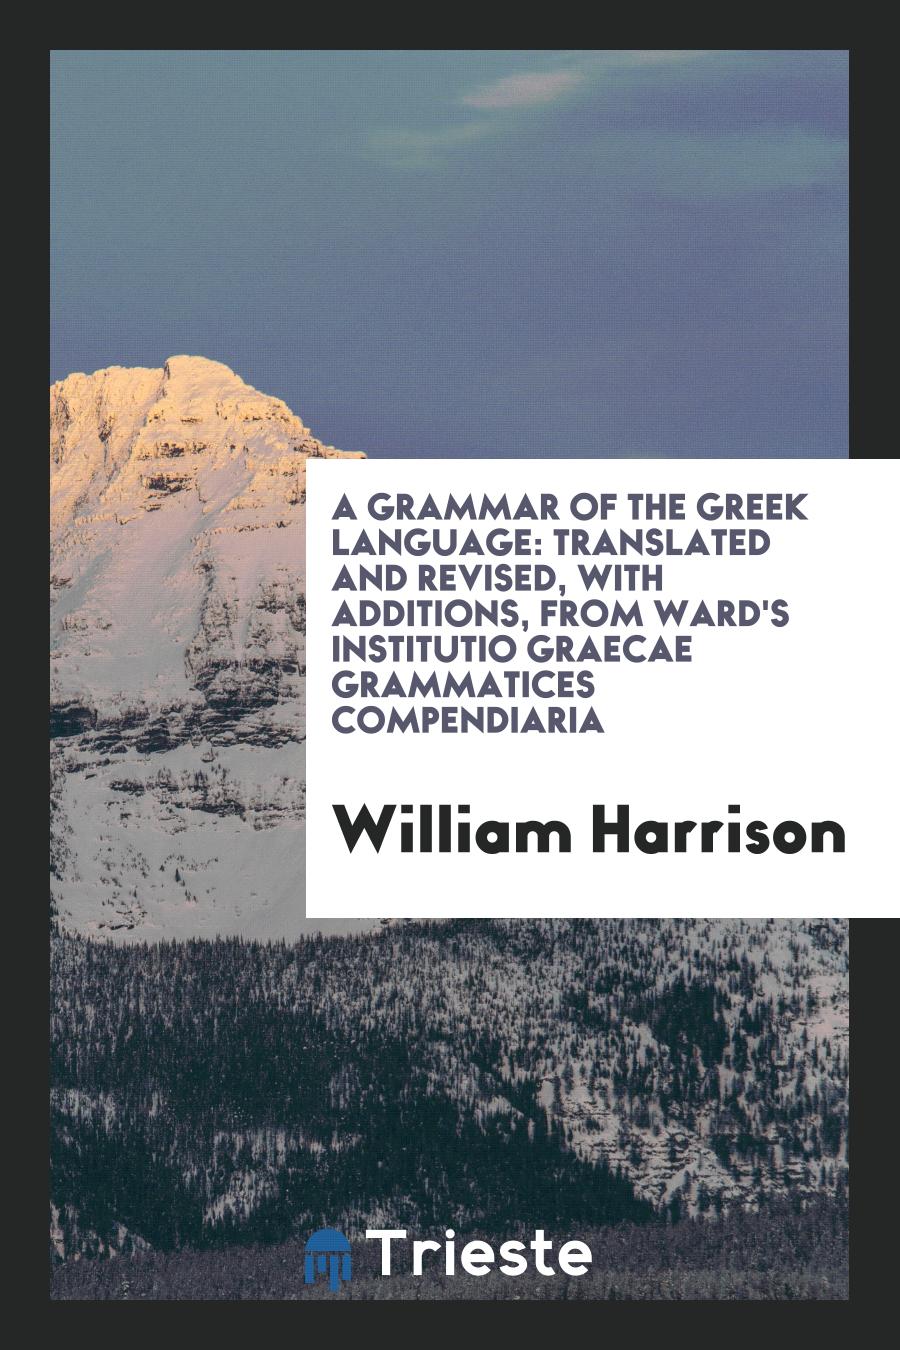 A Grammar of the Greek Language: Translated and Revised, with Additions, from Ward's Institutio Graecae Grammatices Compendiaria